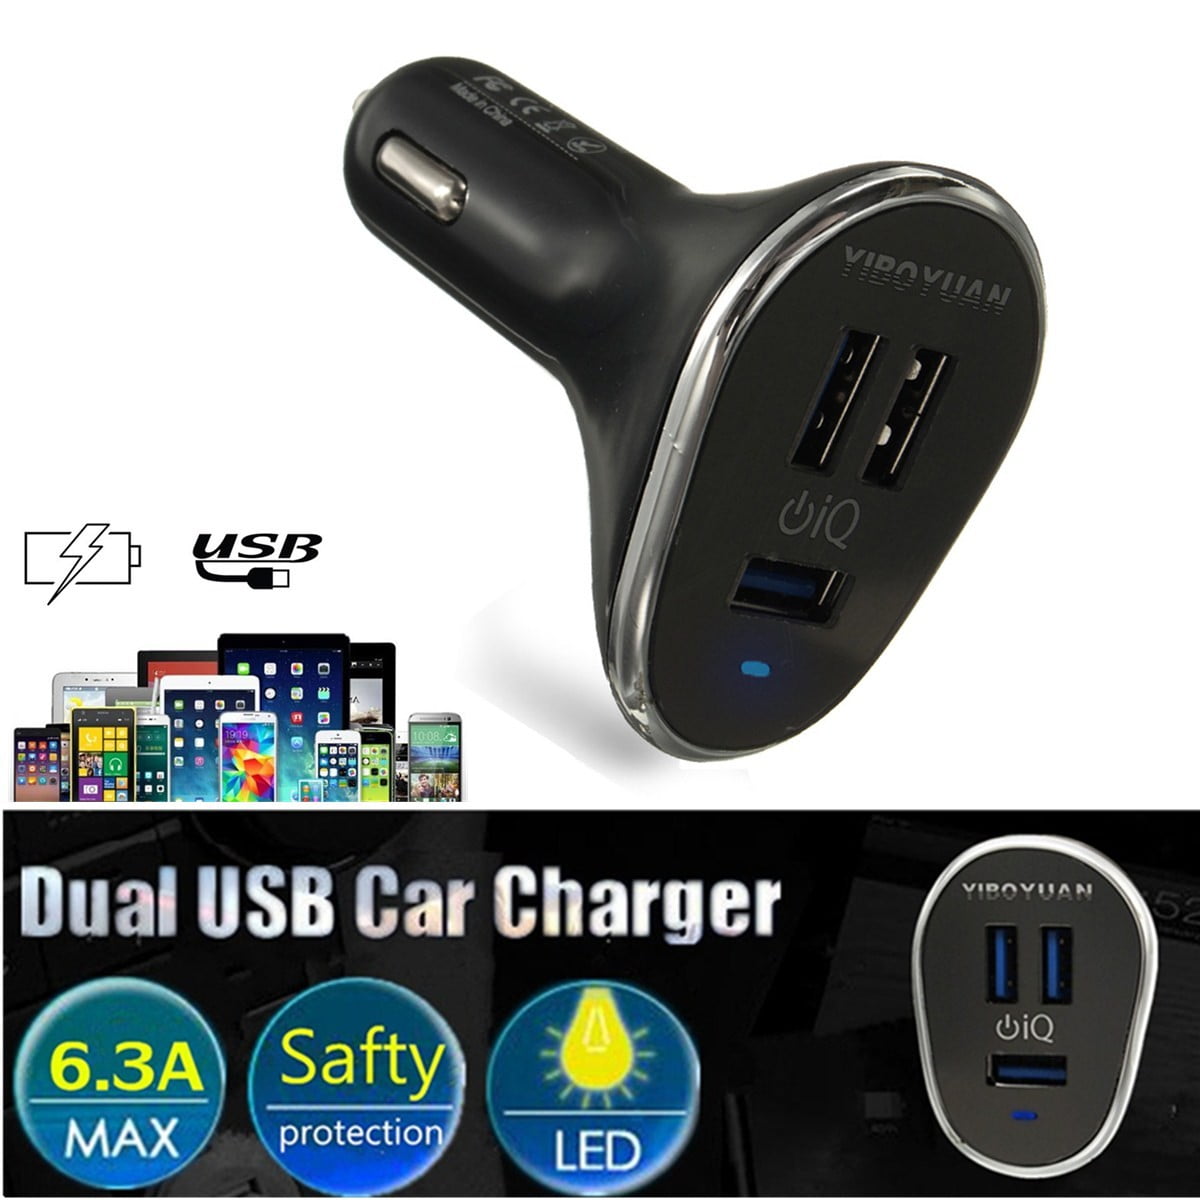 3Port USB Car Charger LED Display For iPhone 6 6s Samsung Galaxy S6 Note 5 4 HTC ...1200 x 1200